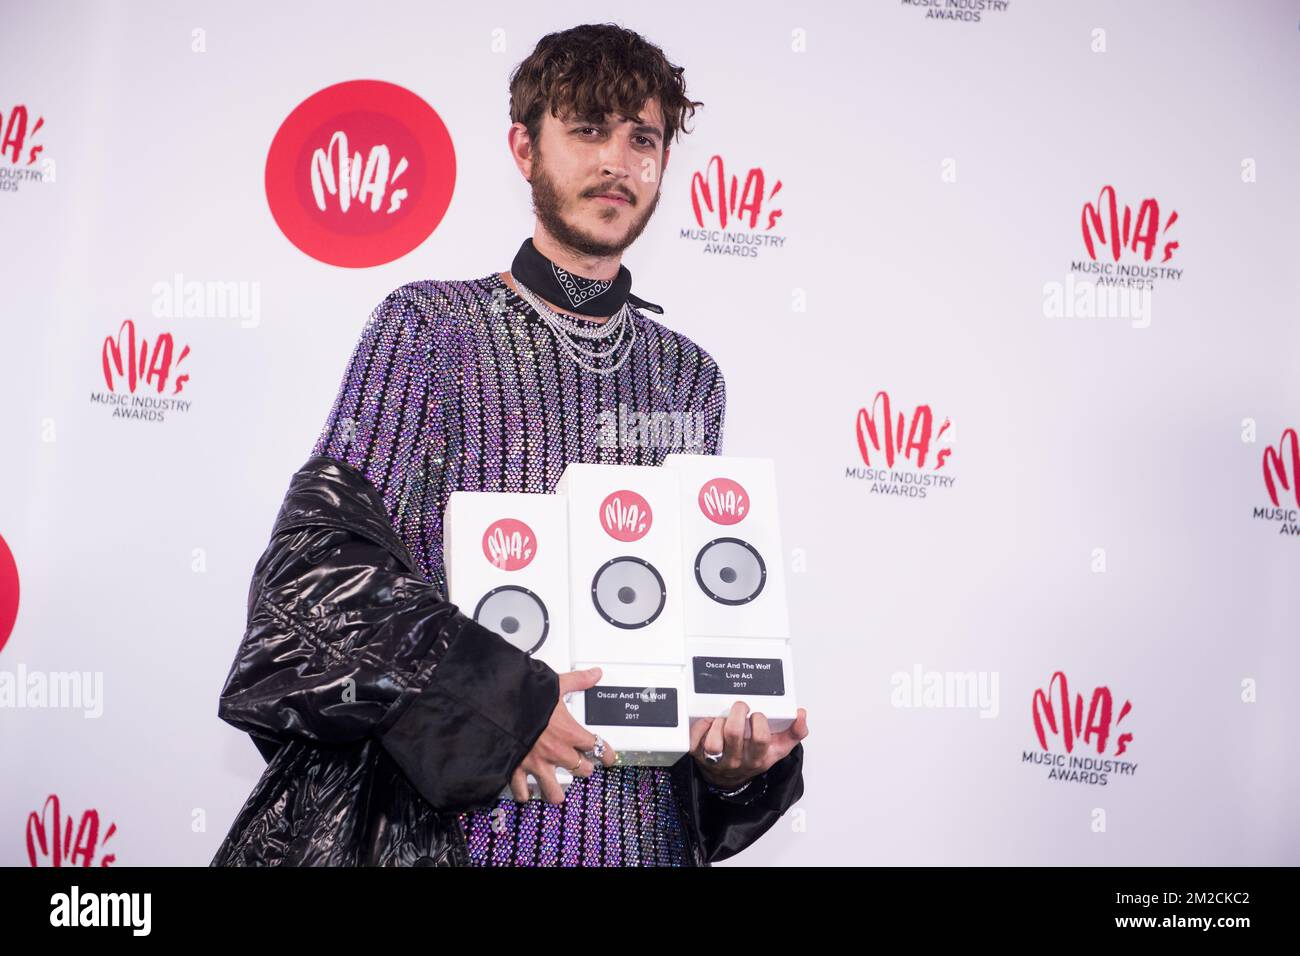 Artist Max Colombie aka Oscar and the Wolf with his awards at the eleventh edition of the MIA's (Music Industry Award) award show, in Brussels, Tuesday 30 January 2018. The MIA awards are handed out by the VRT and Kunstenpunt. BELGA PHOTO JASPER JACOBS Stock Photo